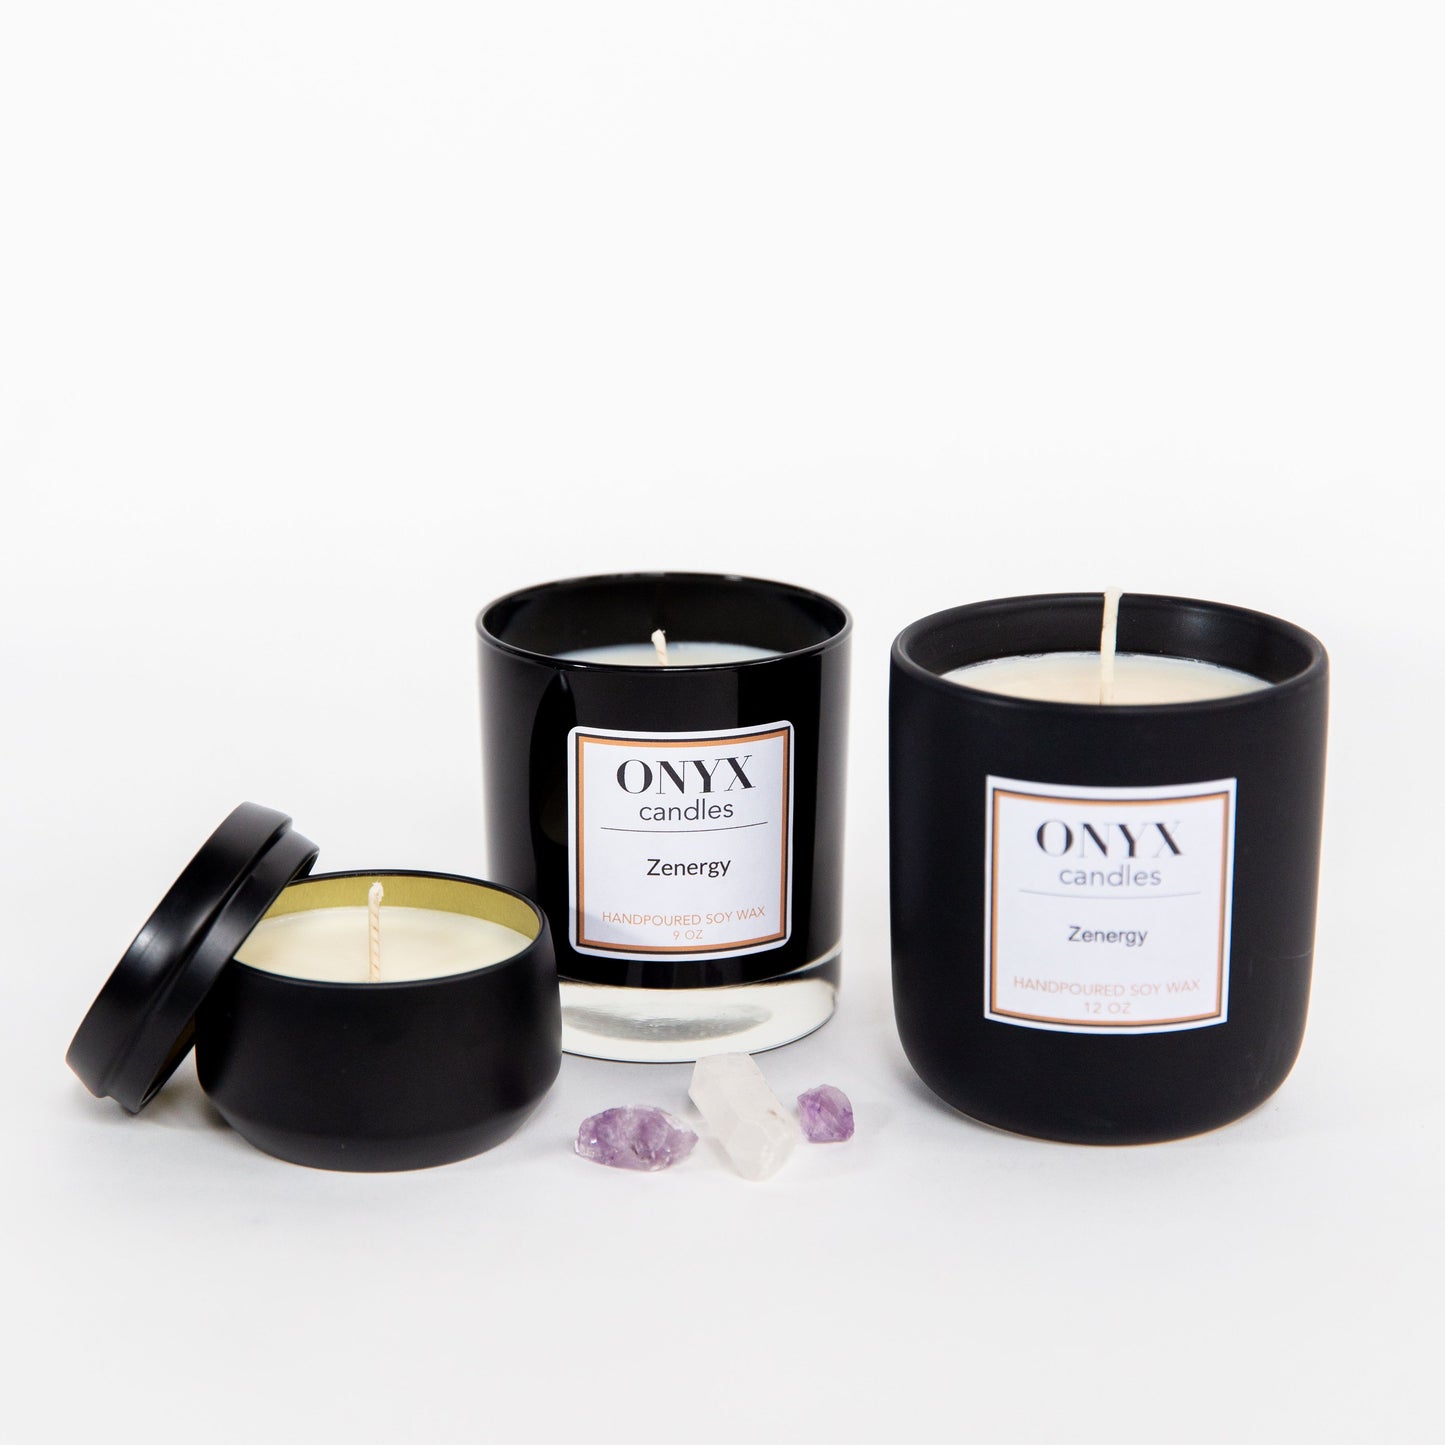 Zenergy candle collection in three size varietals. Shown left to right is the 4oz matte black tin, the 9oz black glass jar, and the 12oz matte black ceramic jar